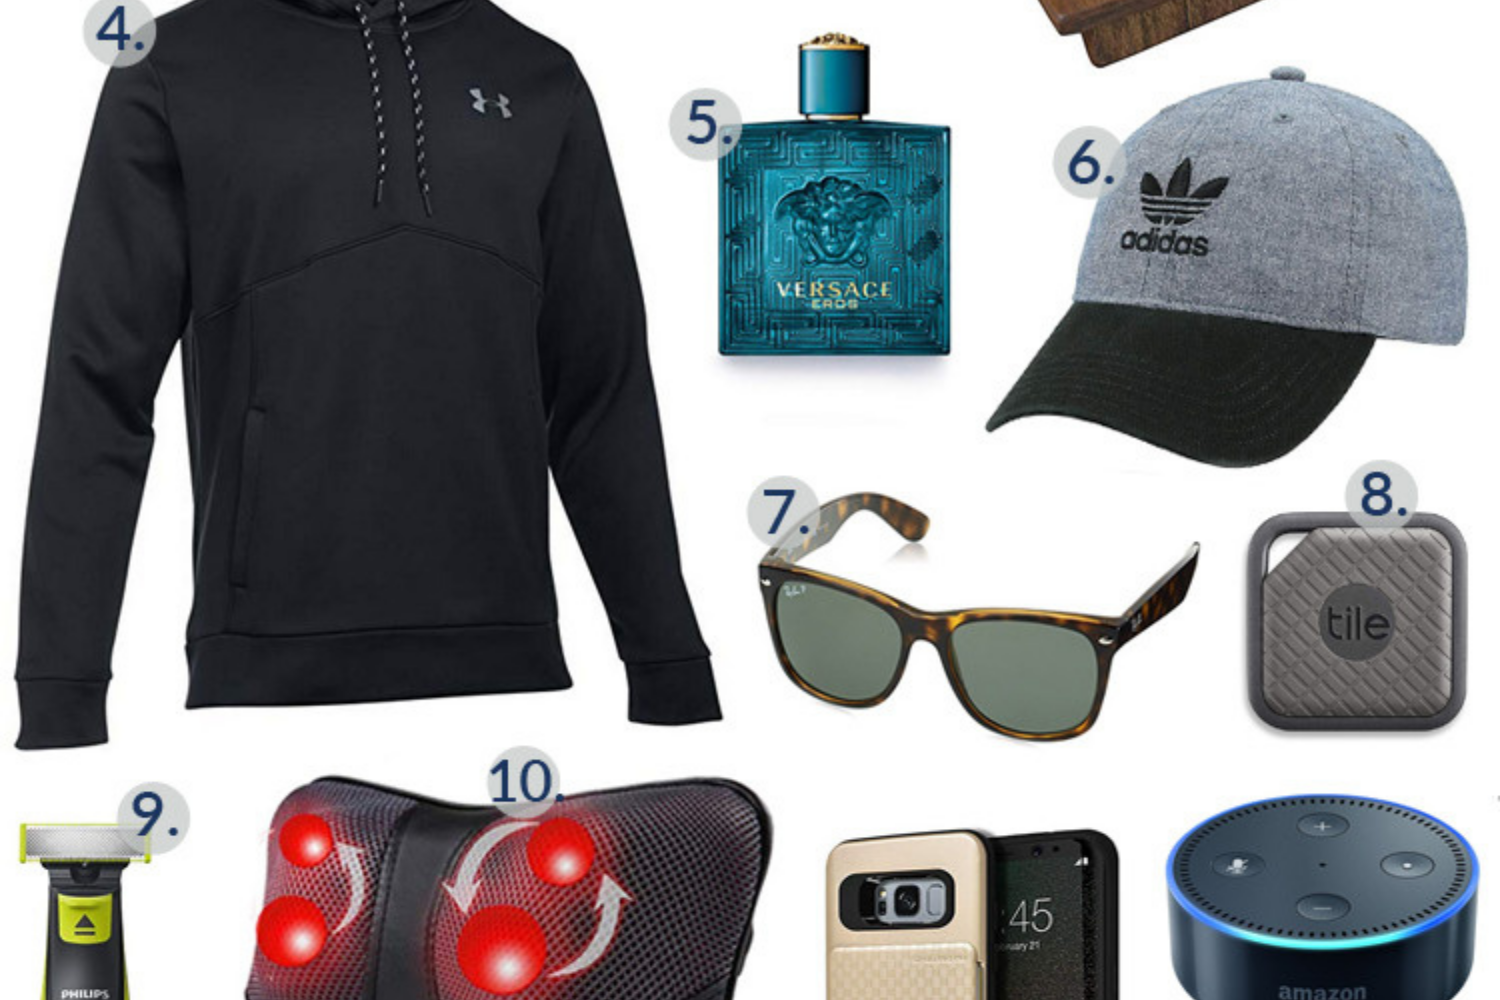 Let’s Find the Perfect Gift for that Guy in your Life – Gift Ideas for Men